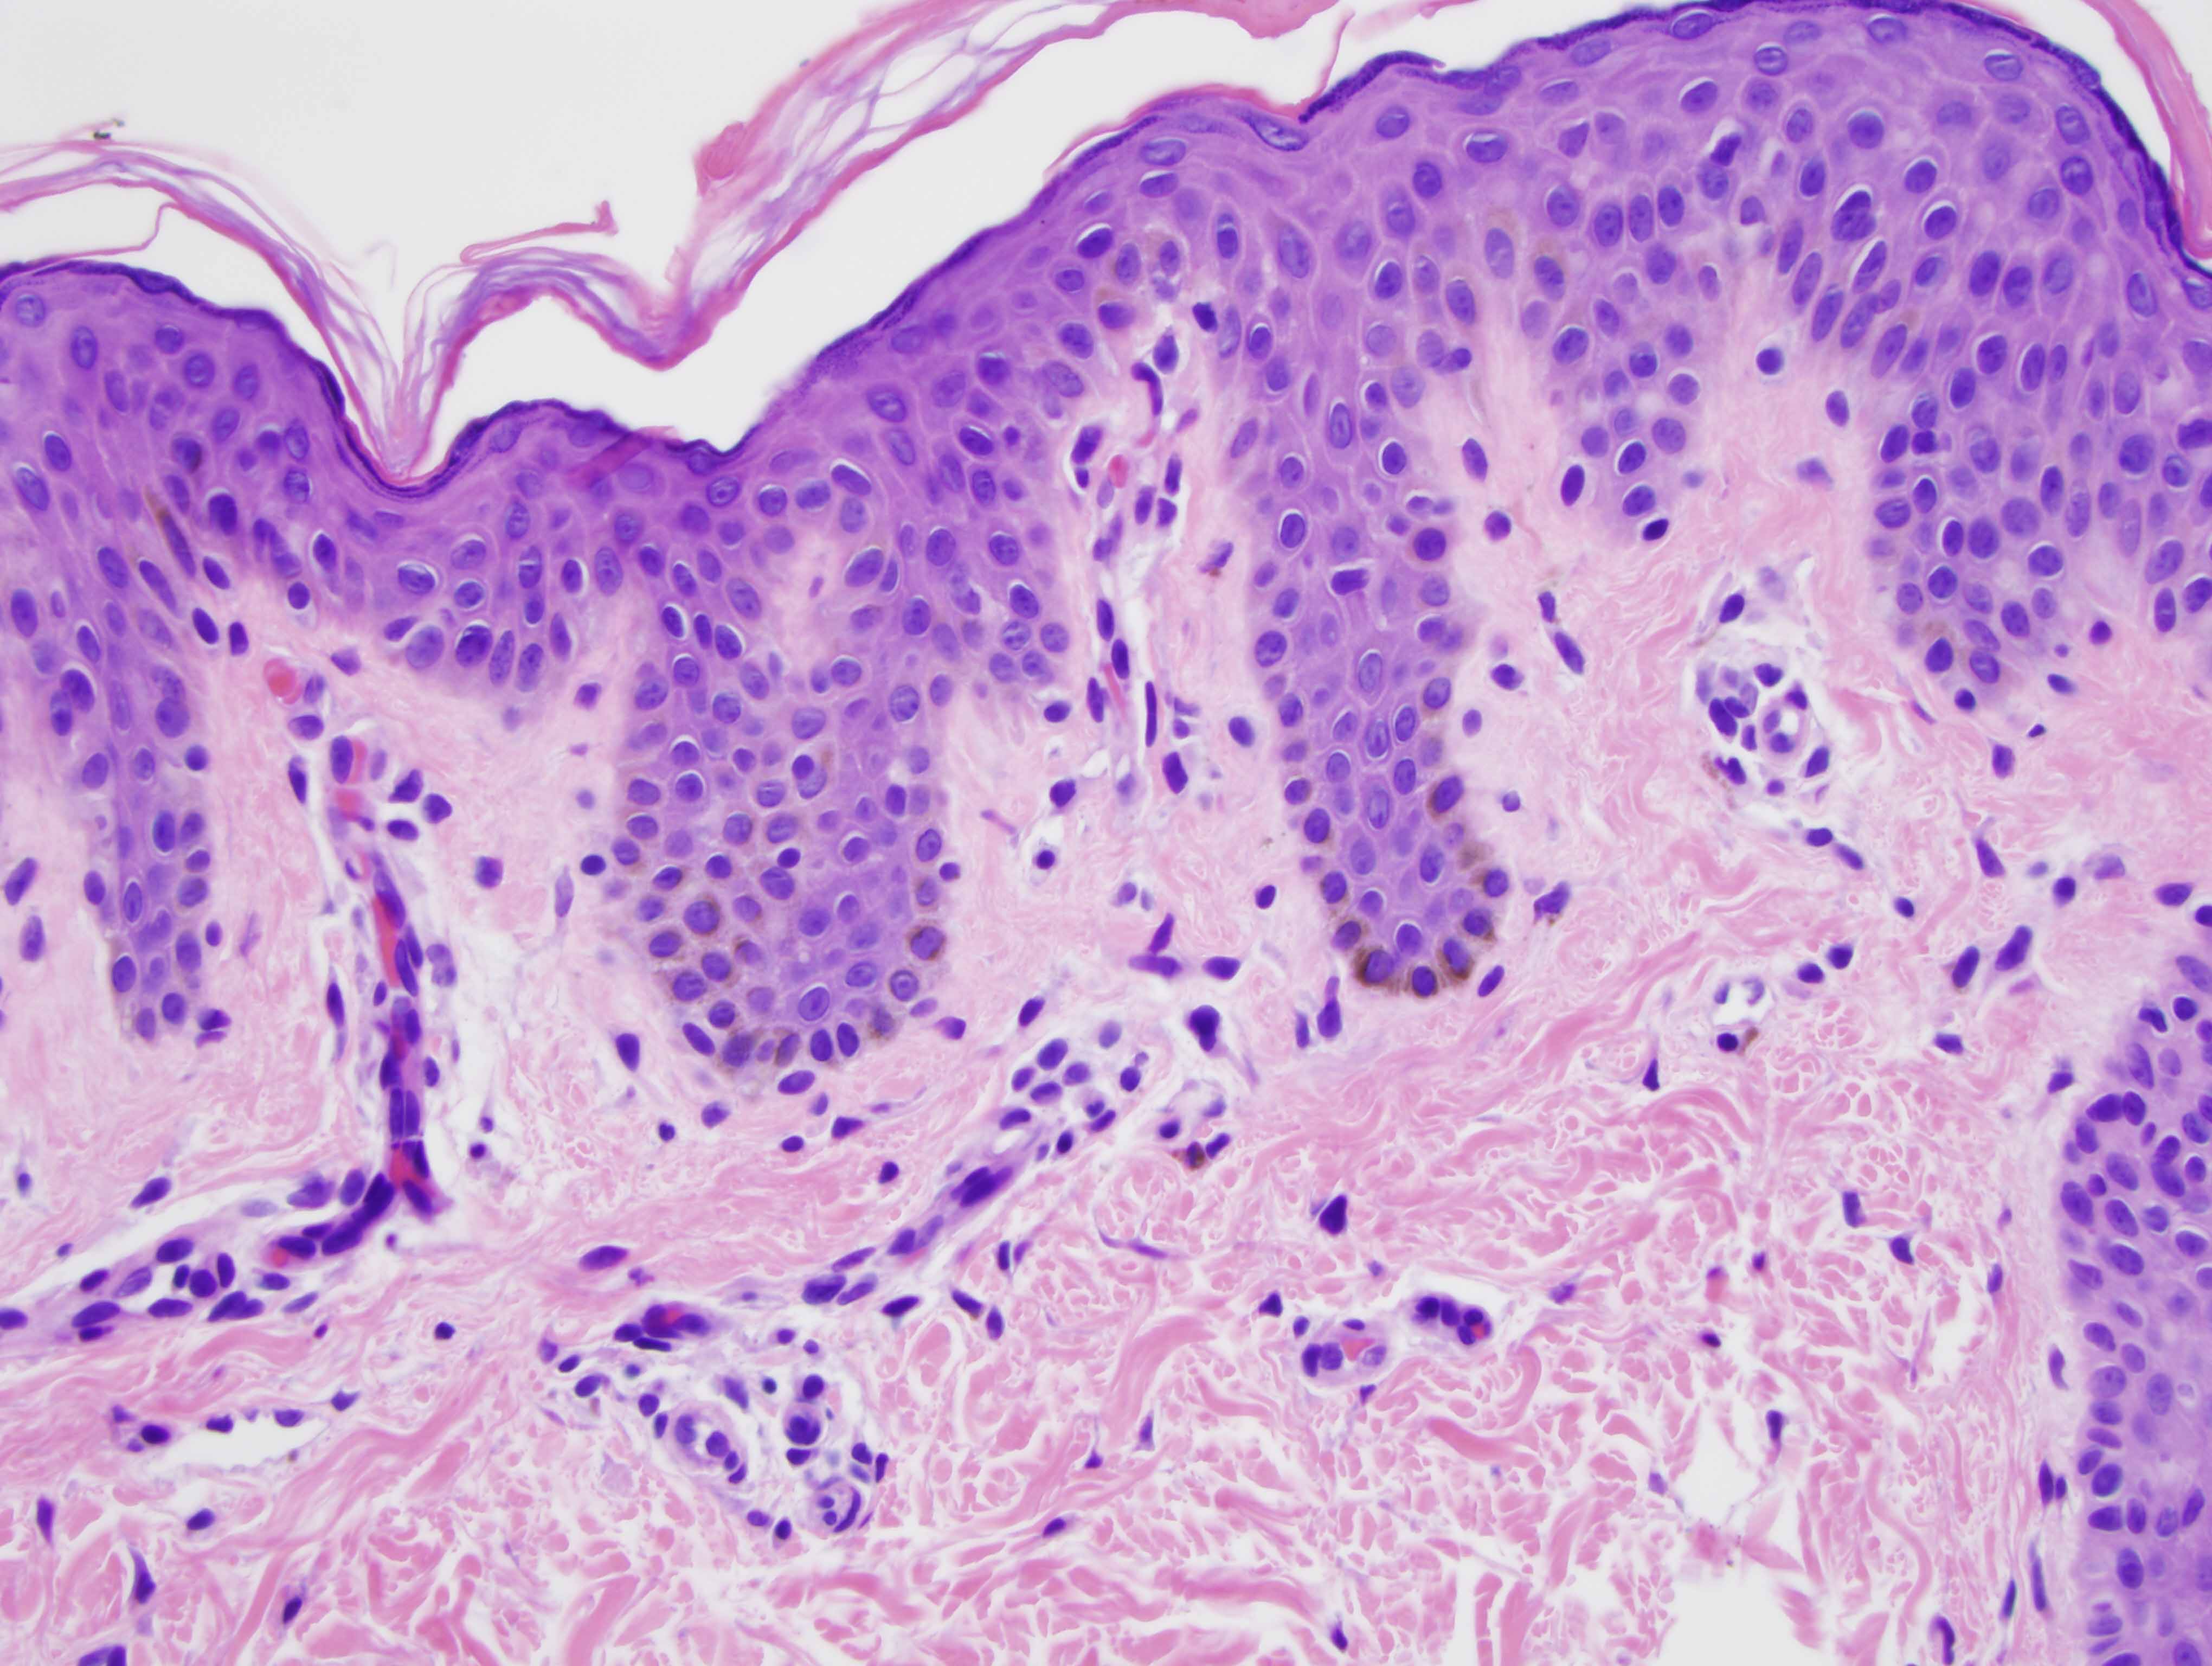 Slide 2: There are areas which show a mildly acanthotic epidermis associated with rete ridge elongation. There is basilar hypermelanosis.